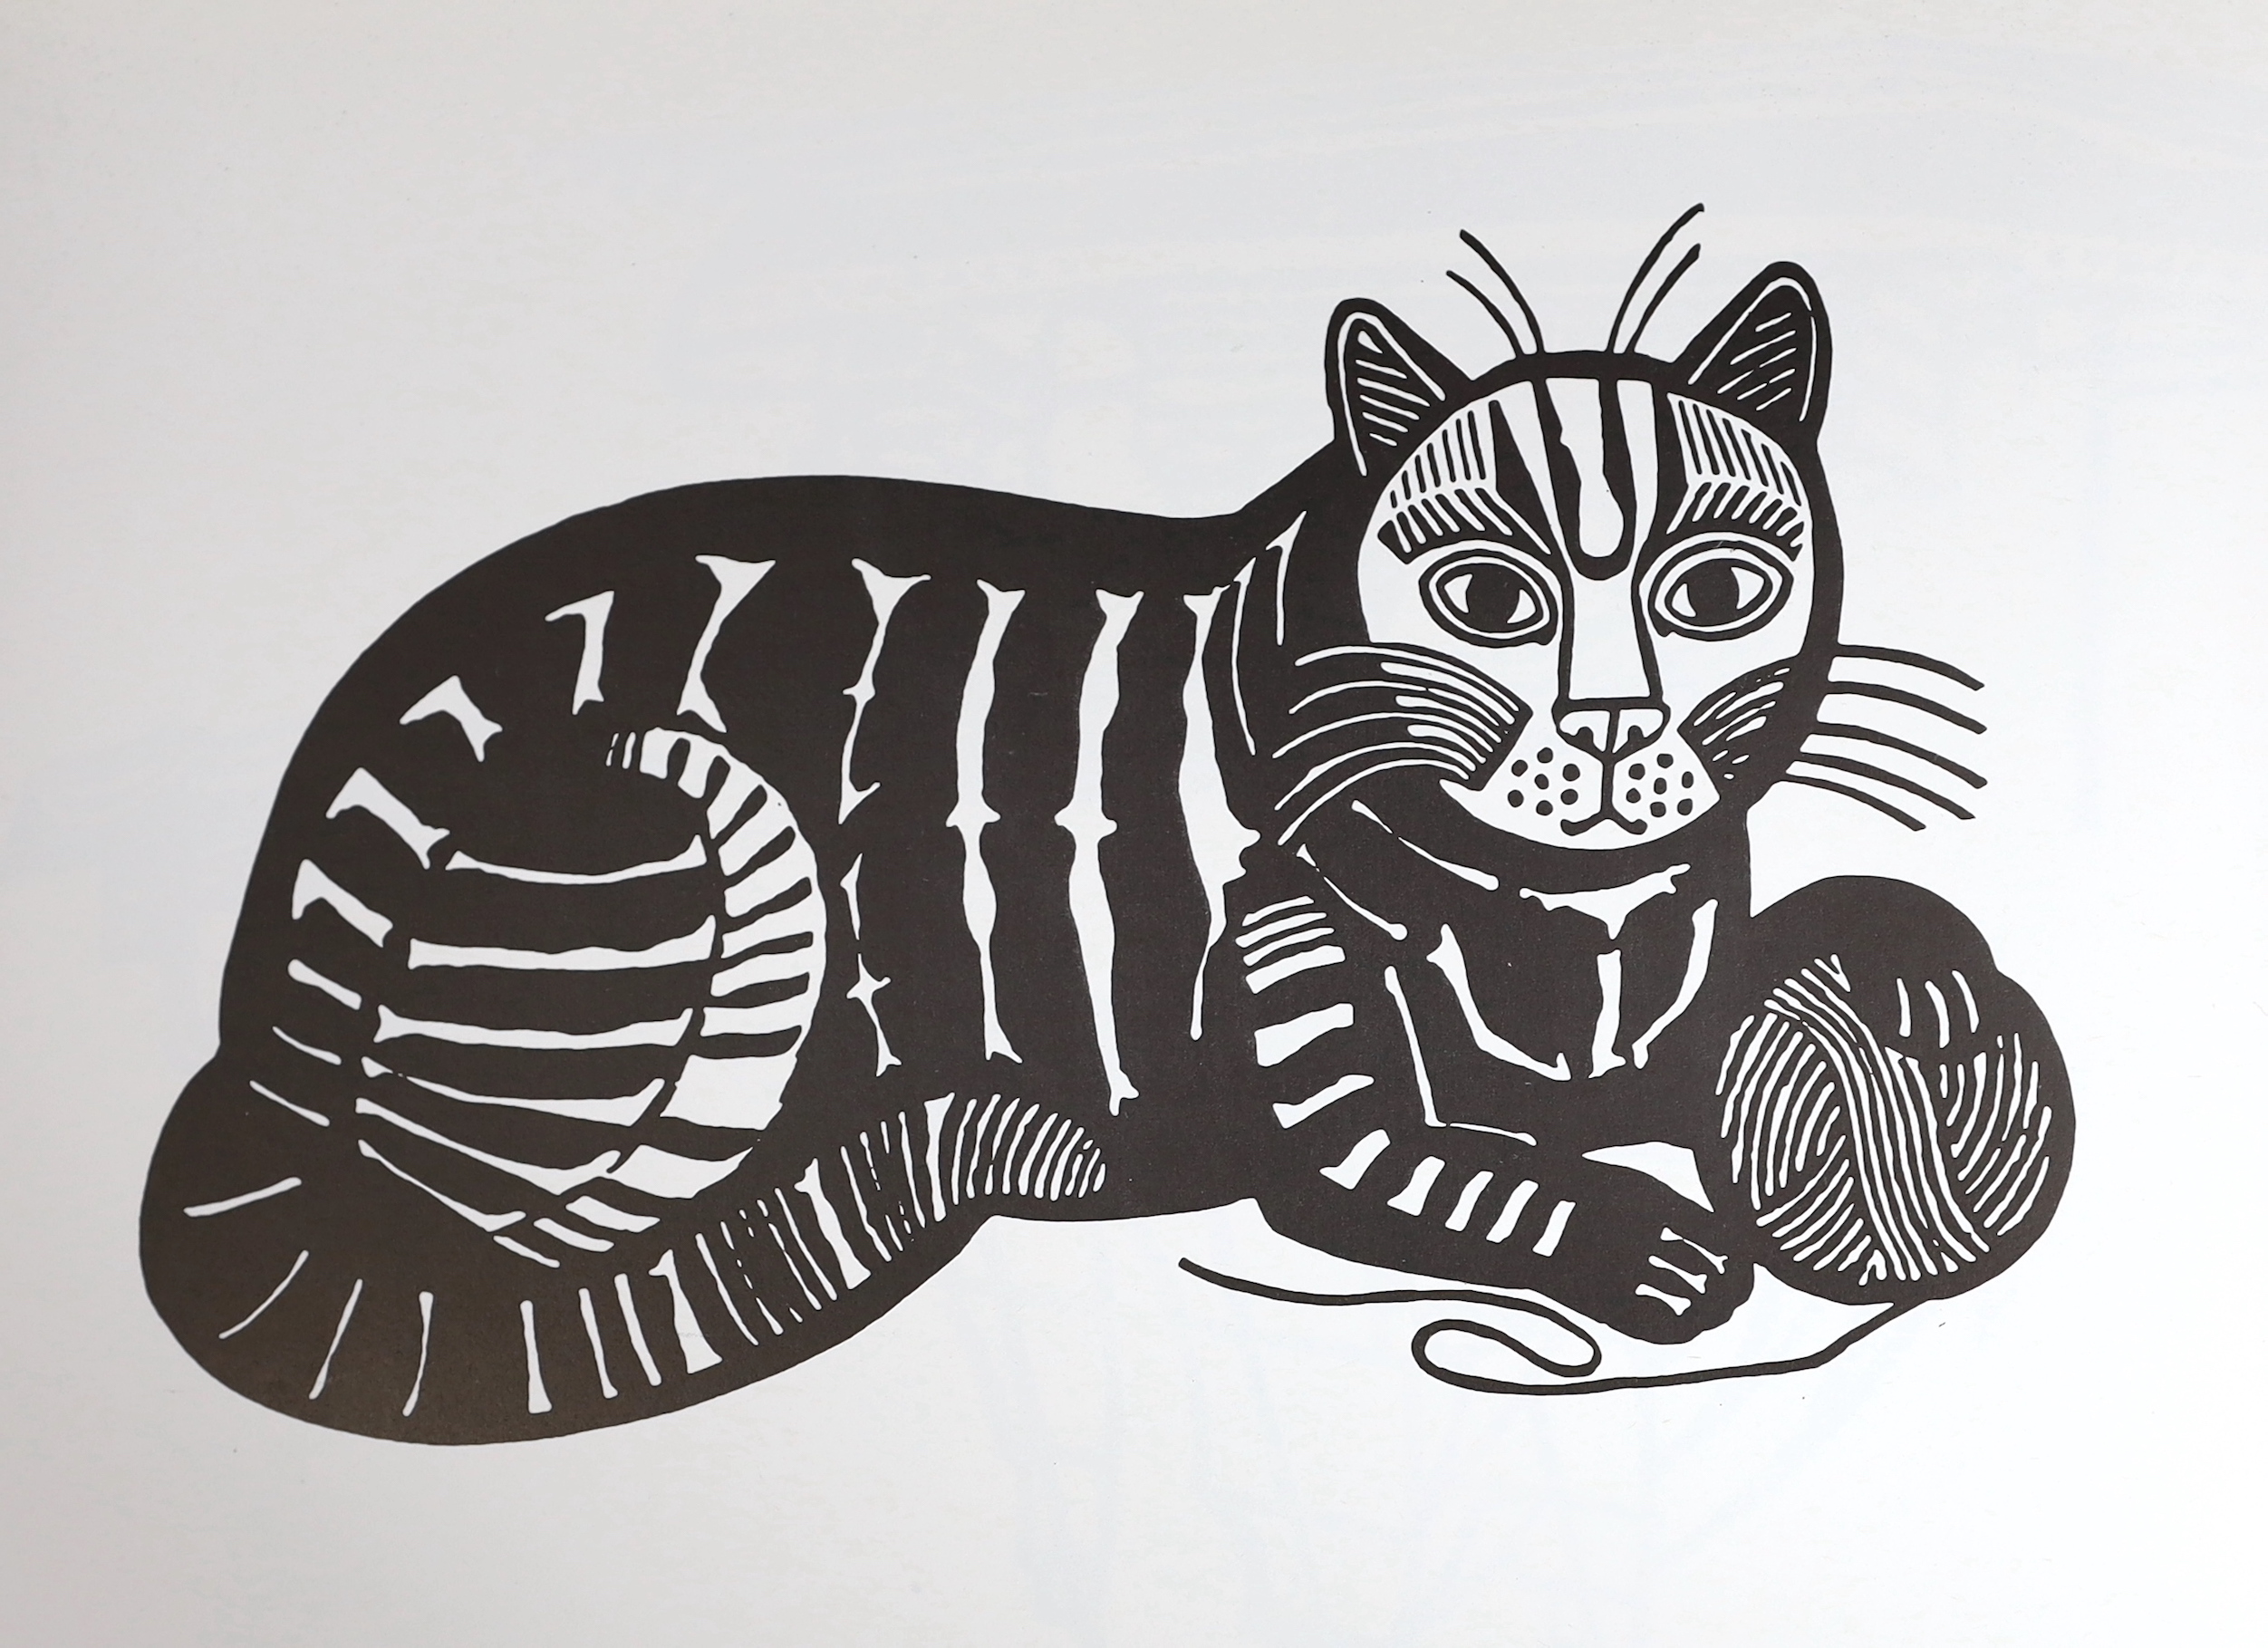 Bawden, Edward: A Portfolio for the Royal College of Art Printmaking Department Appeal Fund, one of 200, with a linocut, ‘’My Cat Wife’’ and 10 other prints, Royal College of Art, London, 1984